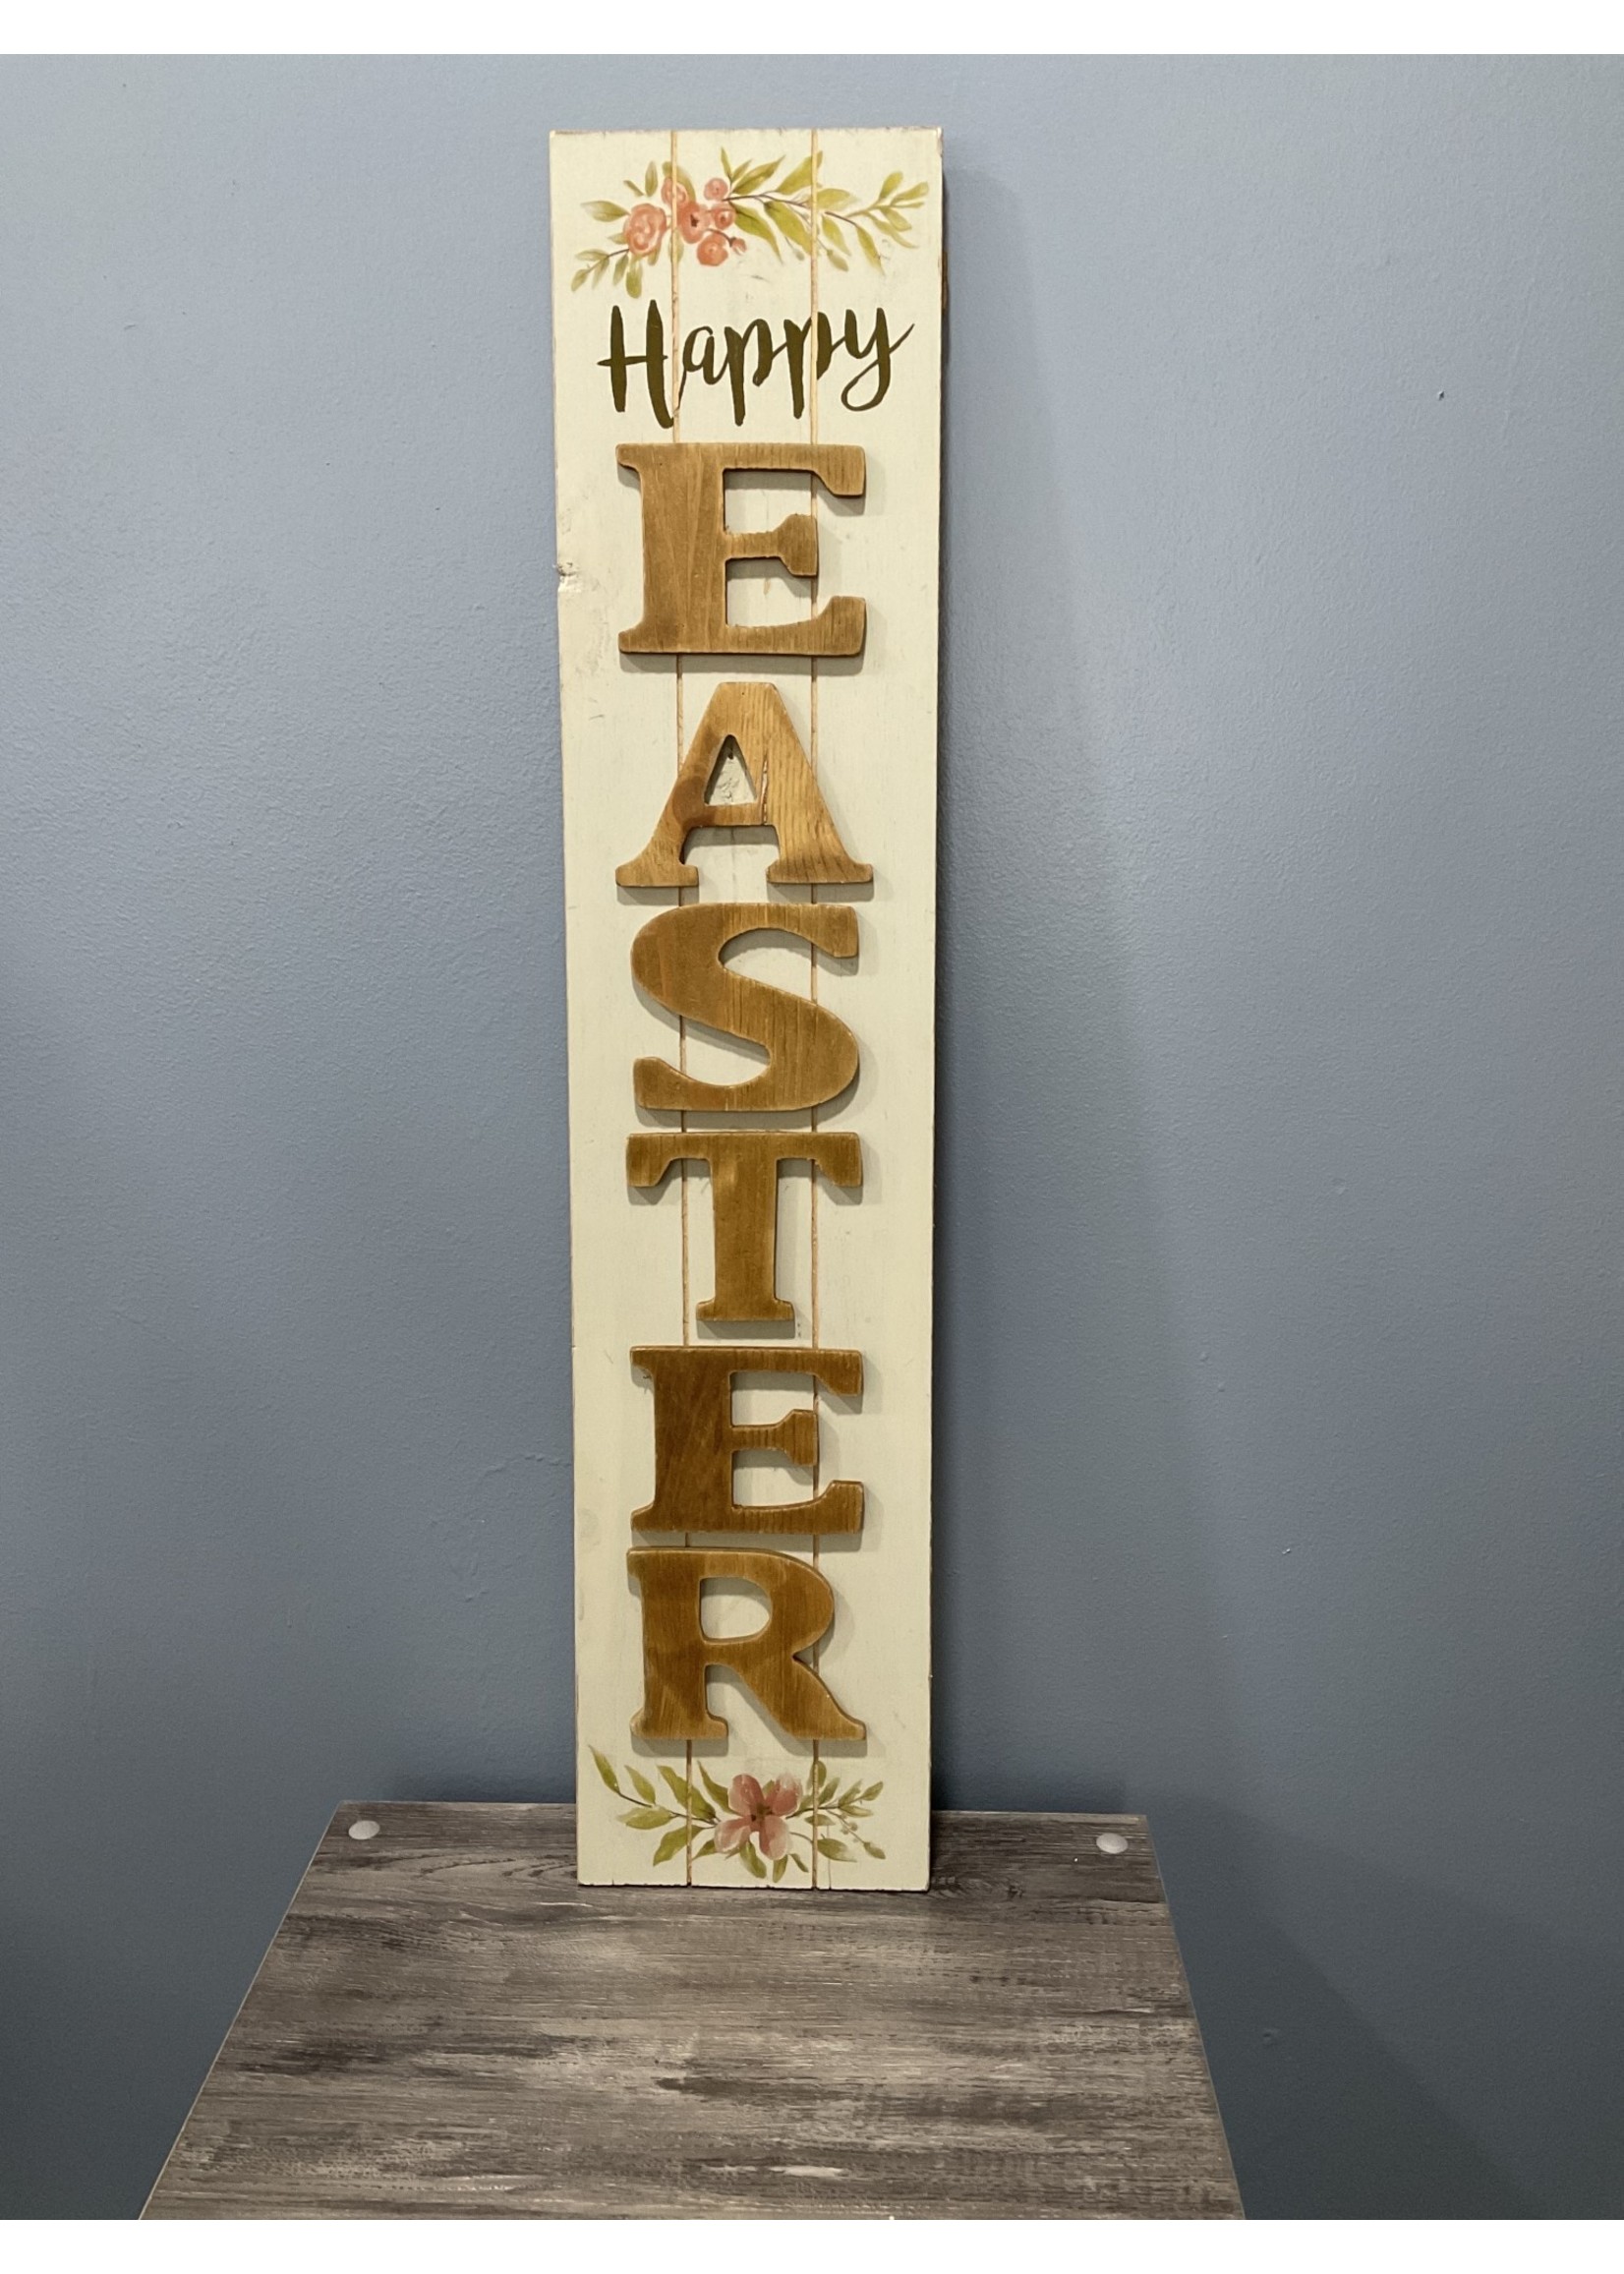 My New Favorite Thing 522 523 Sign 6.5x31-"Happy Easter" in Wooden Blocks